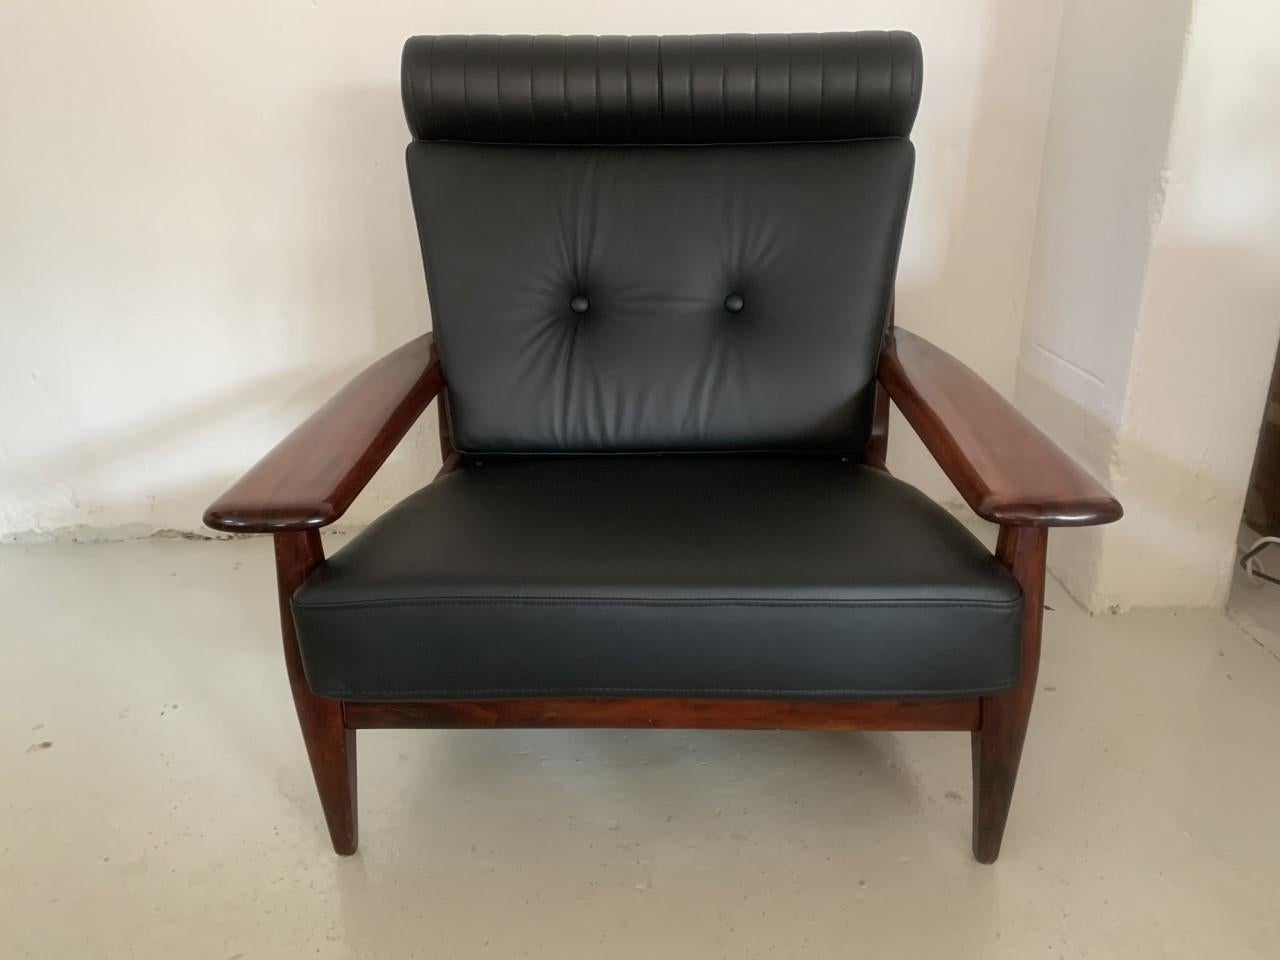 Large Brutalist Lounge chair by Brazilian designer Jean Gillon from the 1960s
Elegant organic shape with oversized armrests.
In a very beautifull vintage condition.
New Premium quality black leather cushions, 

In the 1960s & 1970s a lot of the